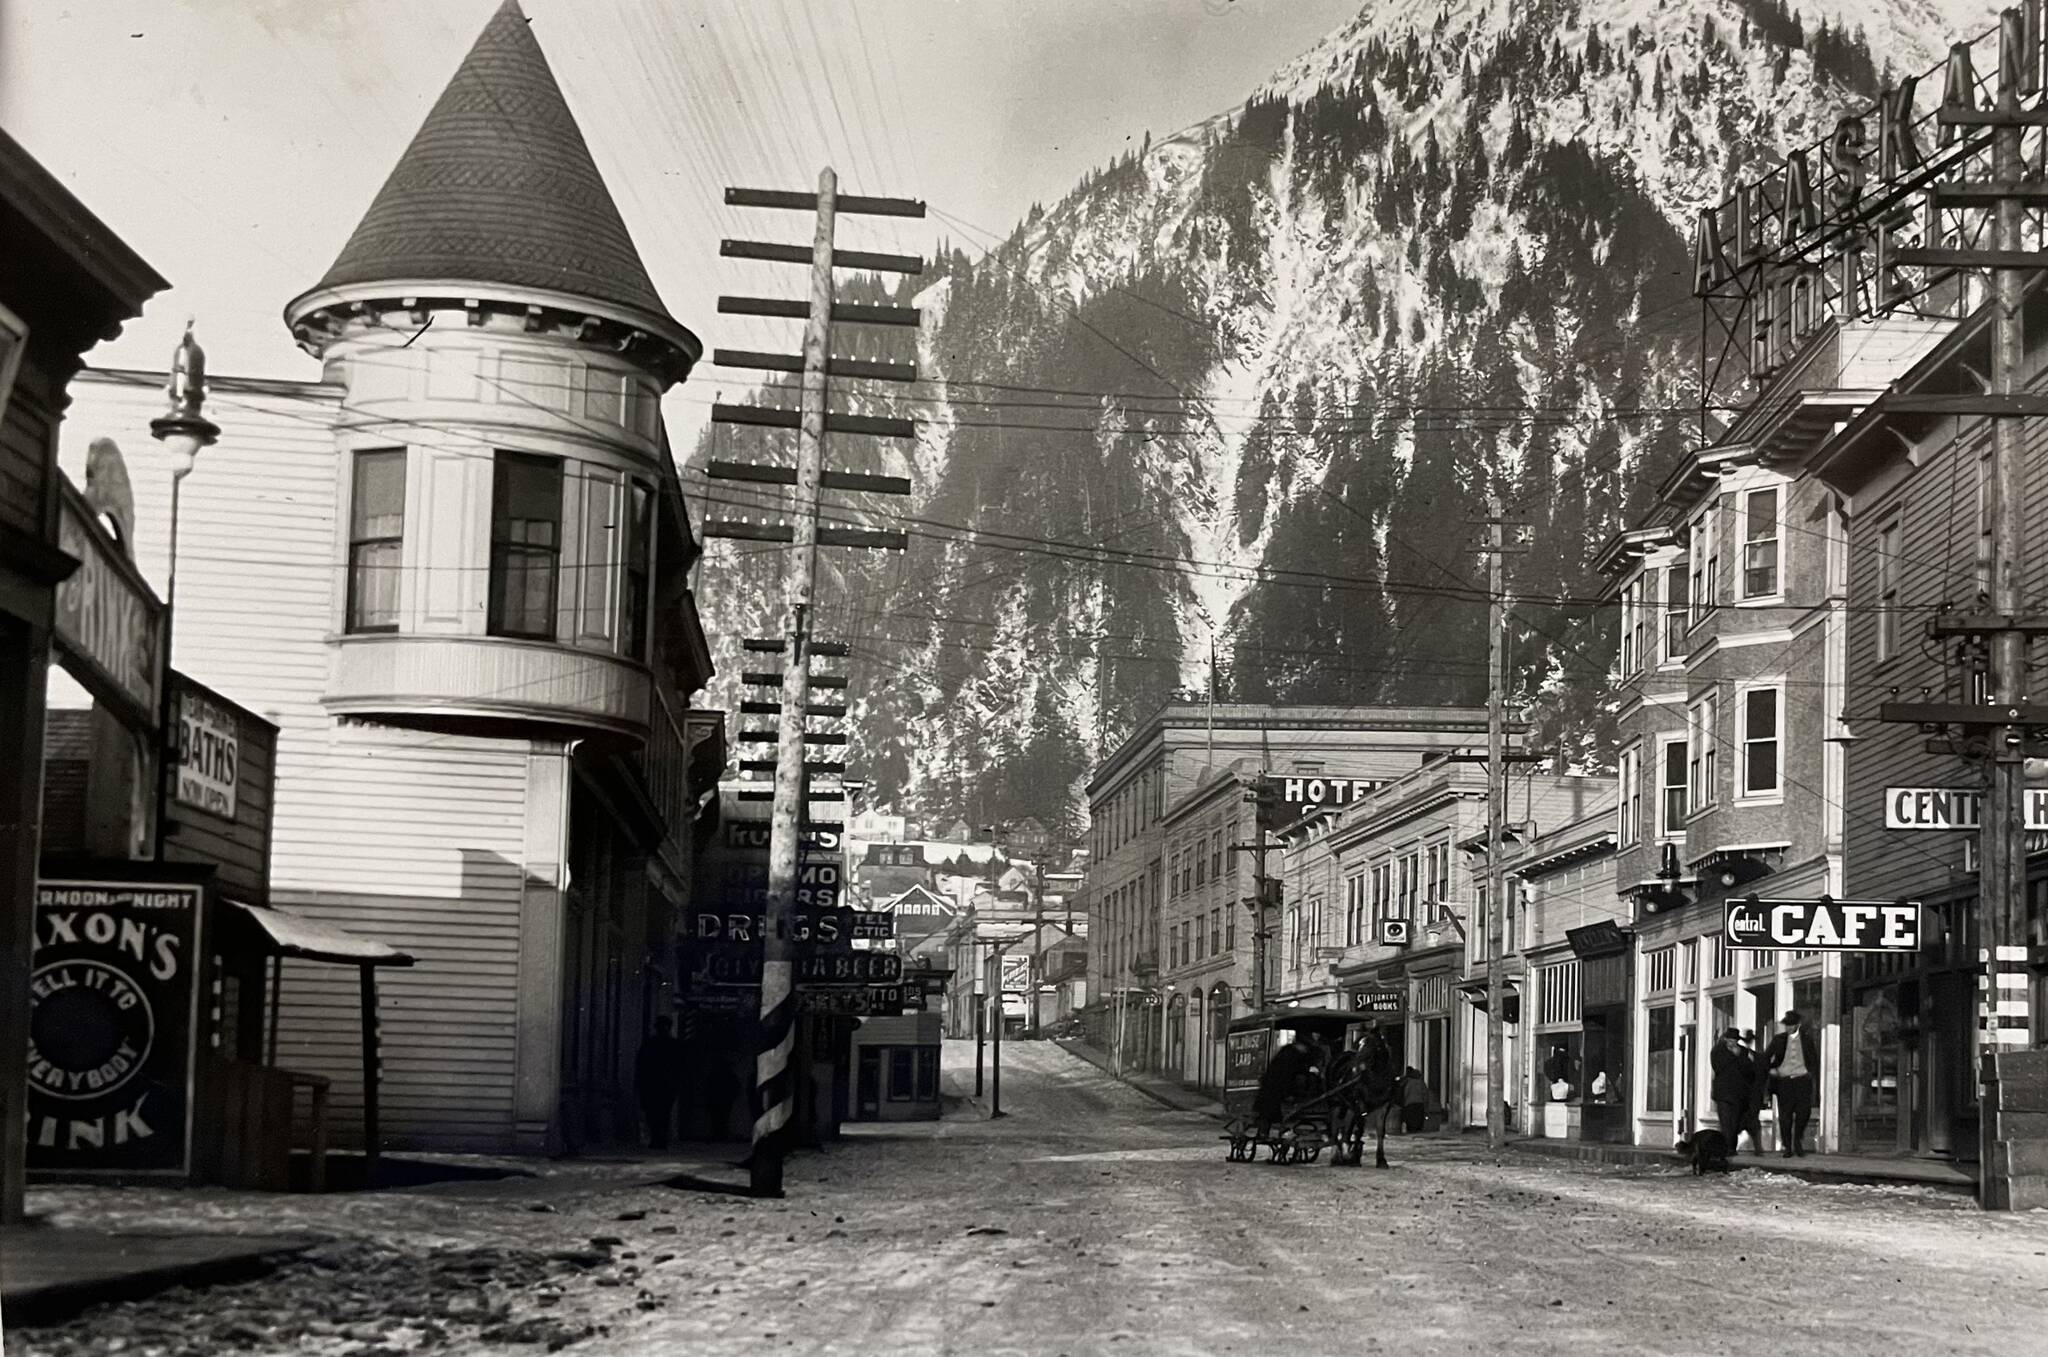 By 1914 when this photo was taken, Juneau had developed into an established city. The Victorian era turreted Alaska Steam Laundry (built 1901) is seen on the left, while other buildings such as the Alaskan Hotel and Central Rooming House are on the right. The rooming house was reconstructed in the 1980s. It is now the Senate Mall. (Alaska State Library-P31-021).